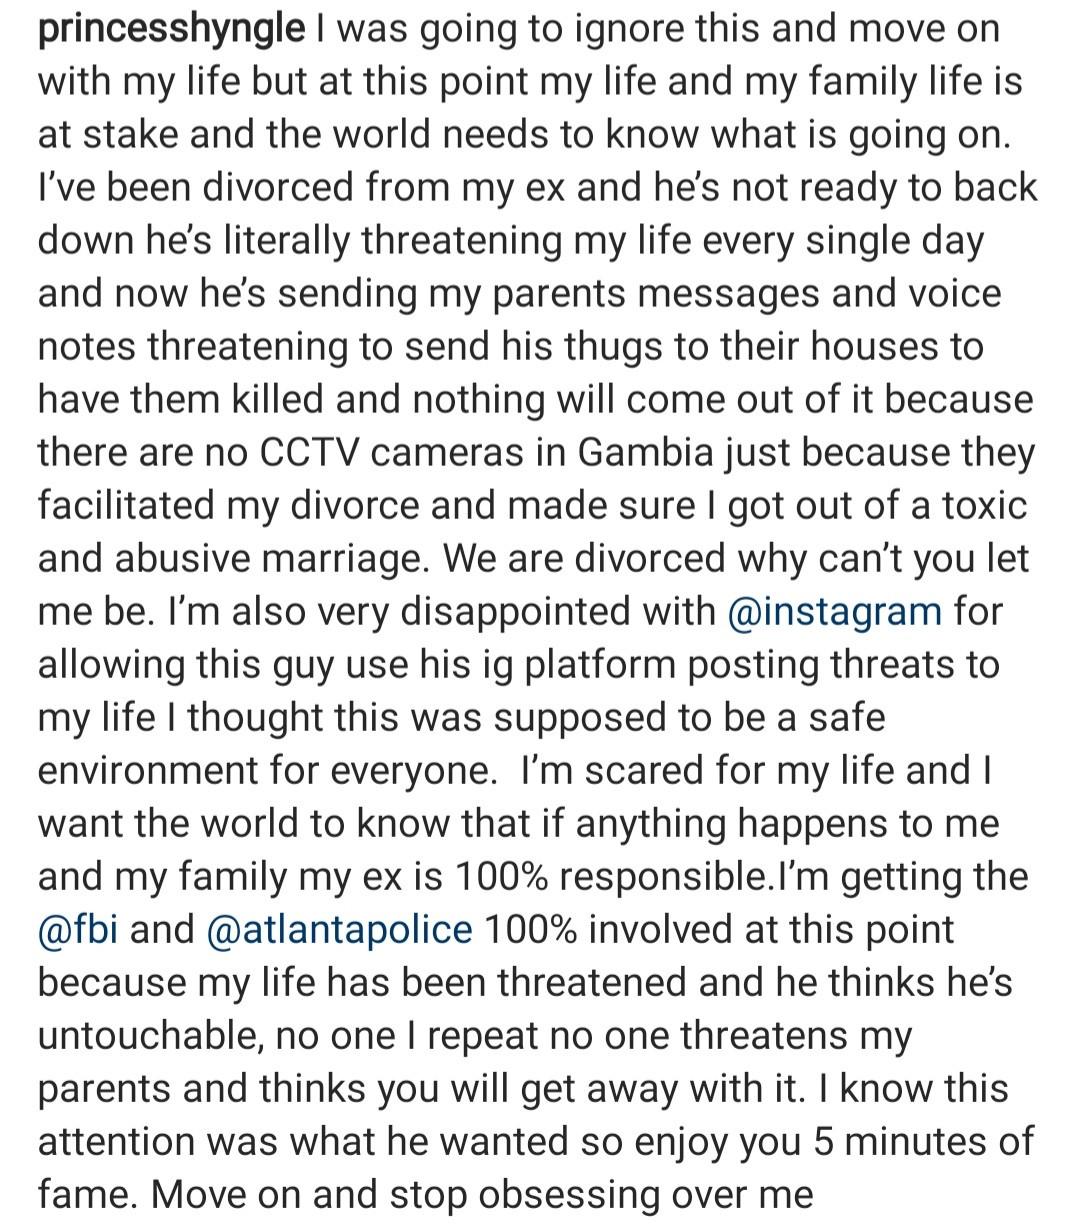 Princess Shyngle cries out for help, releases audio from ex-husband threatening to take her life